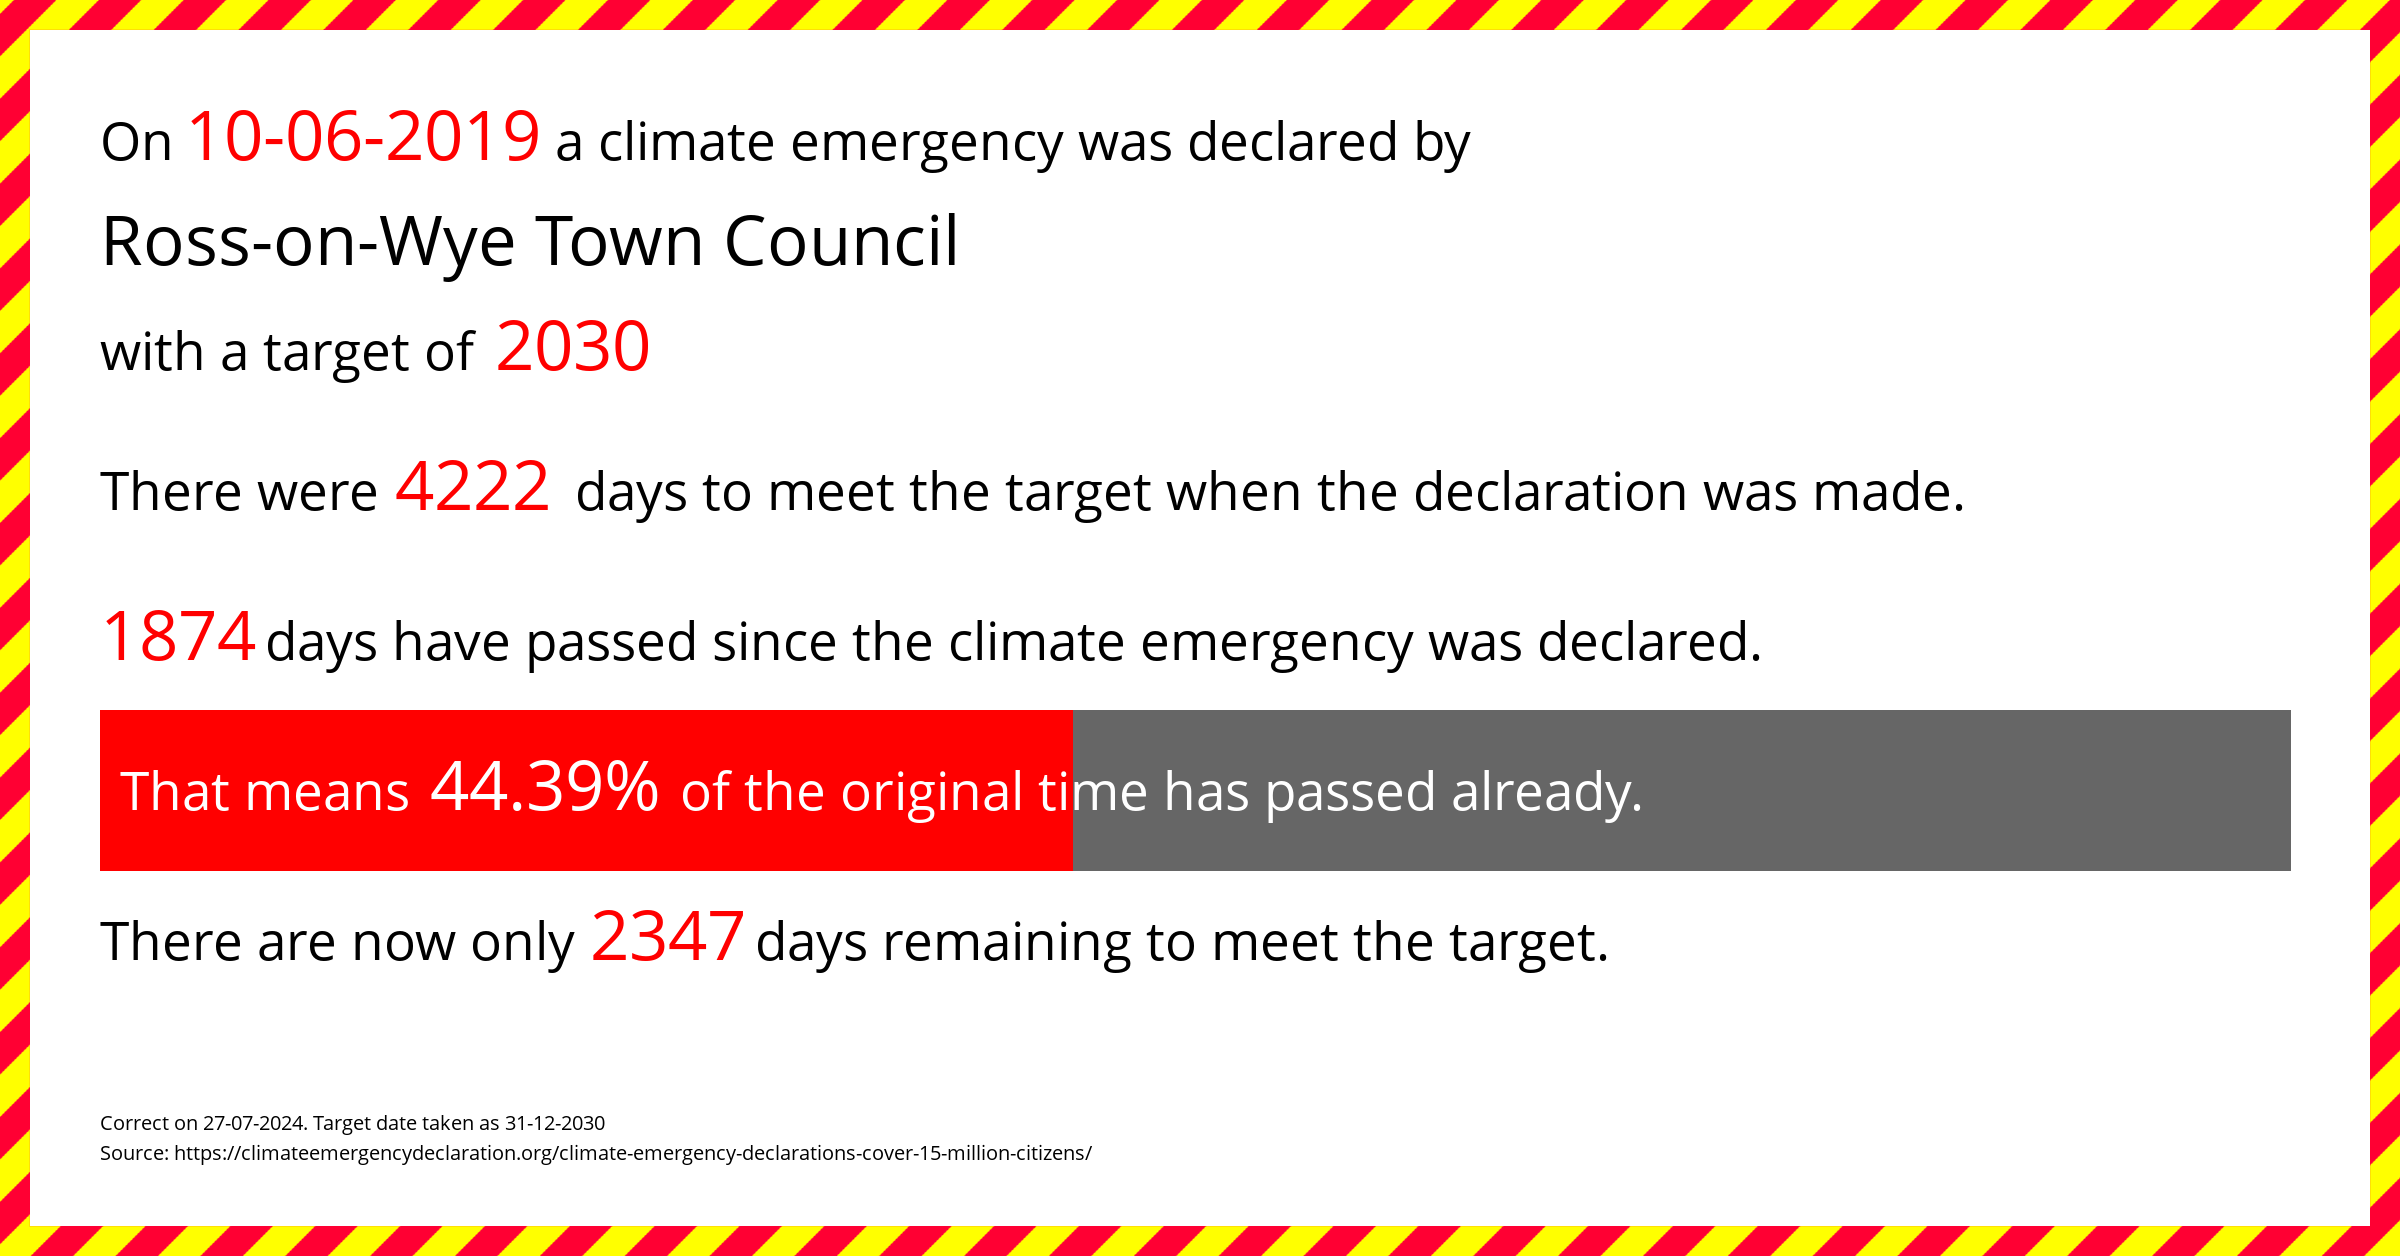 Ross-on-Wye Town Council declared a Climate emergency on Monday 10th June 2019, with a target of 2030.